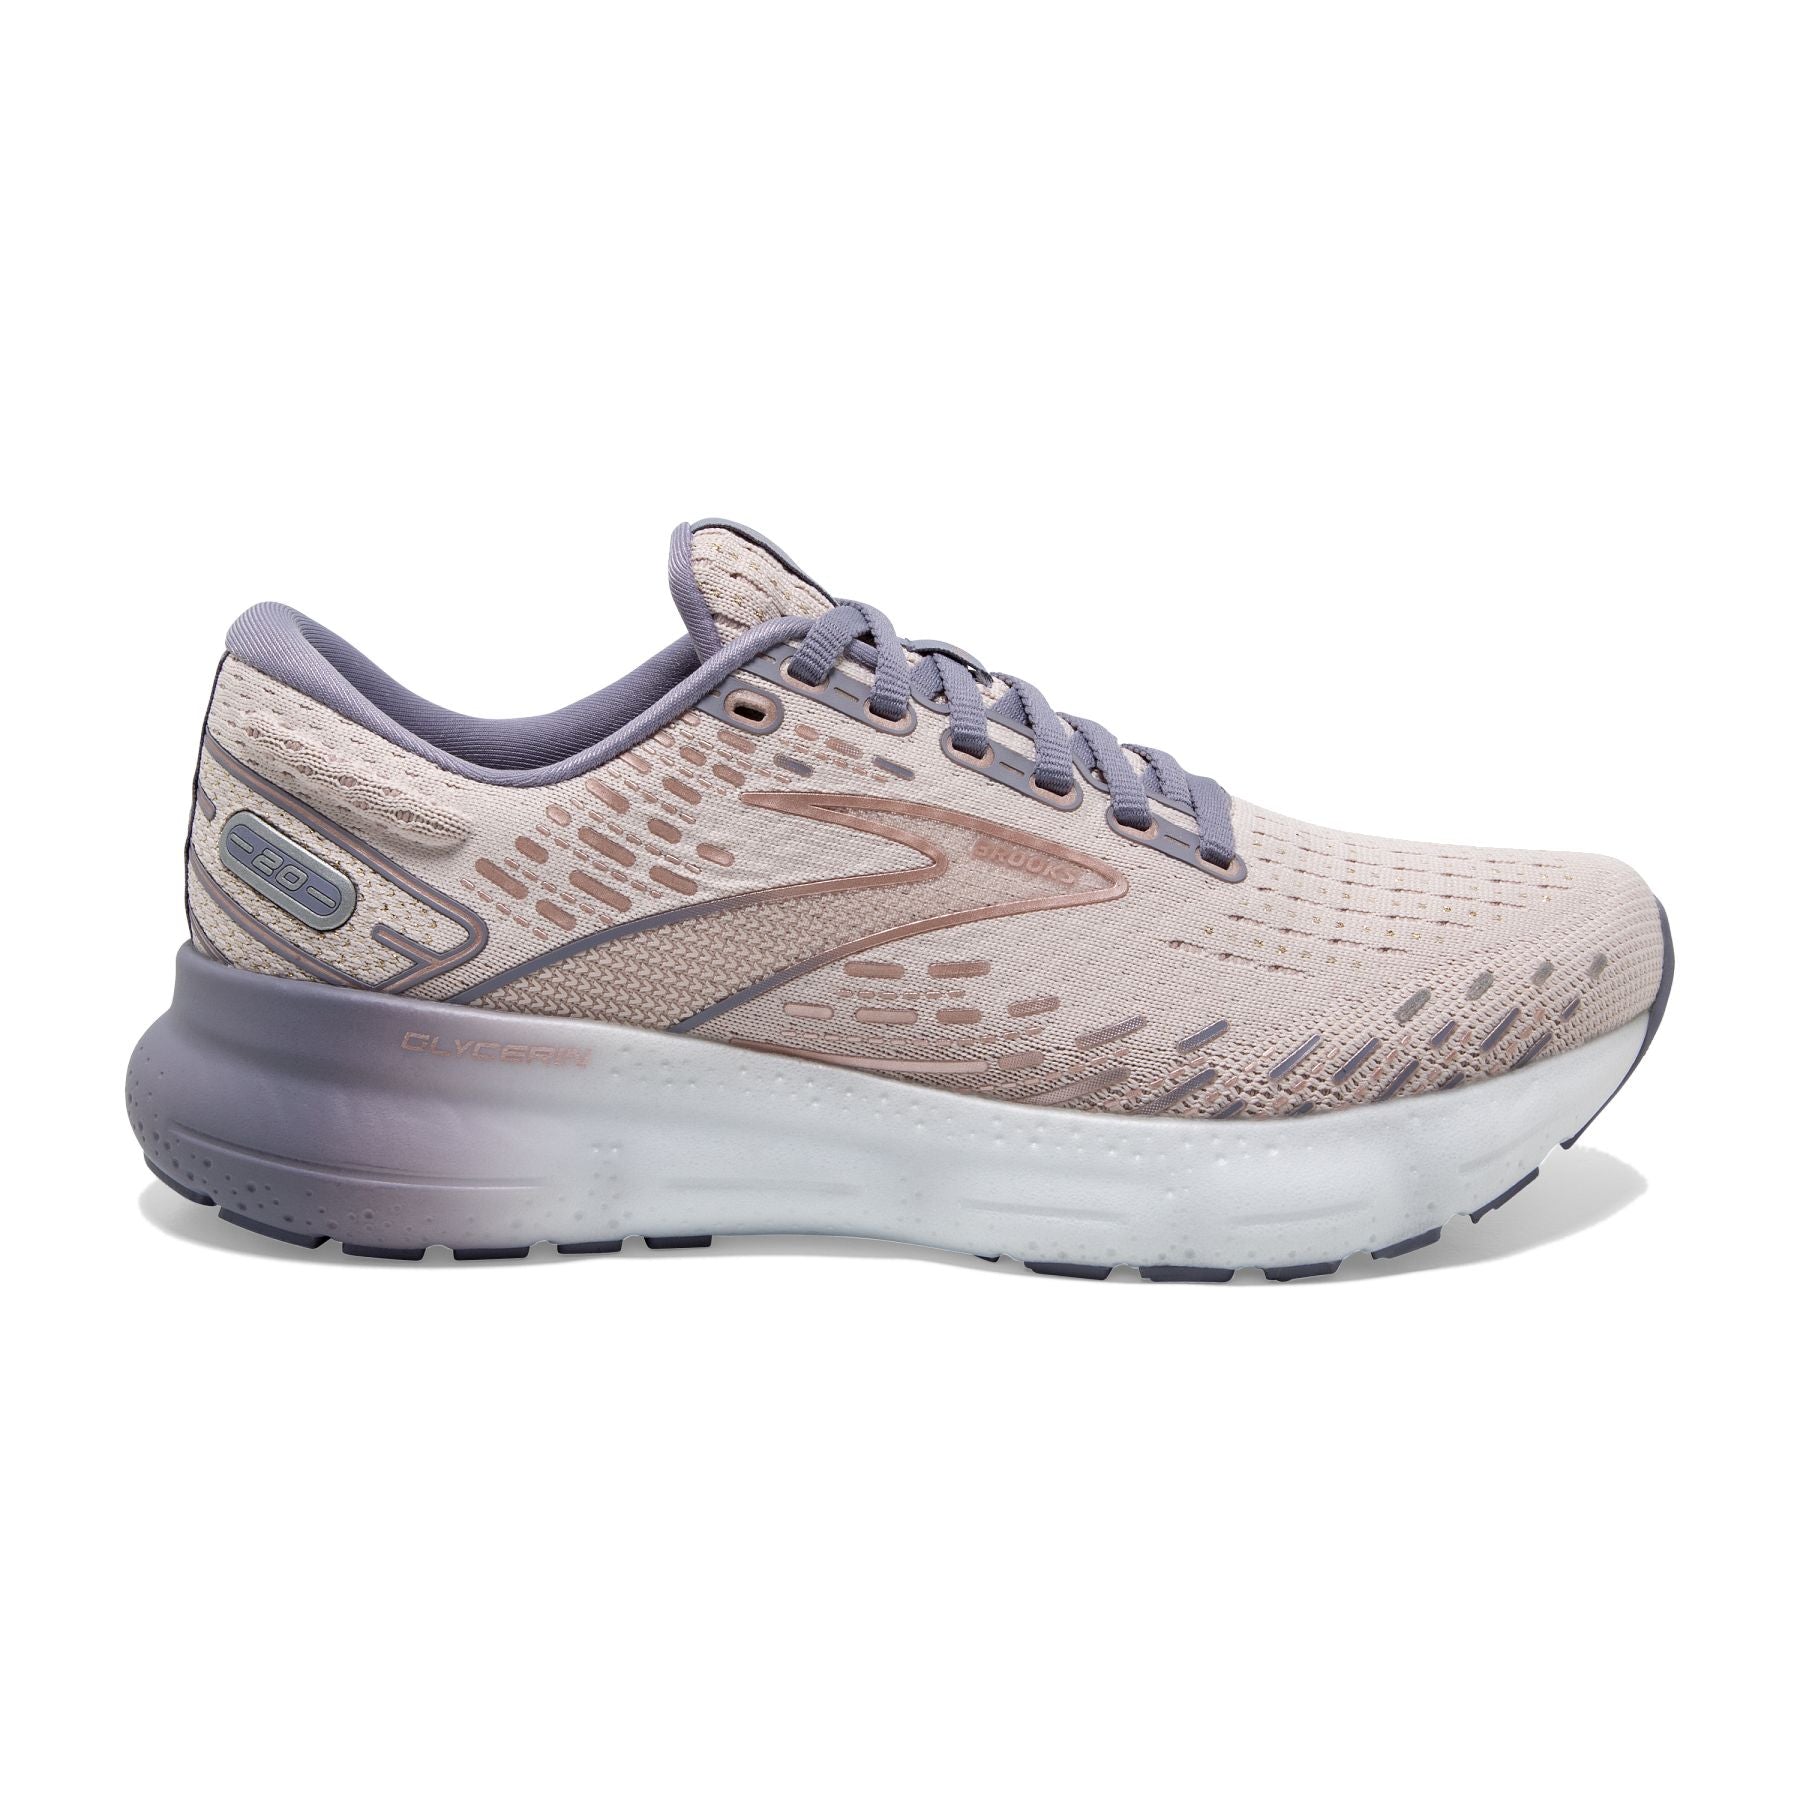 Lateral view of the Women's Glycerin 20 by Brooks in the color Lilac/Silver Bullet/Pink